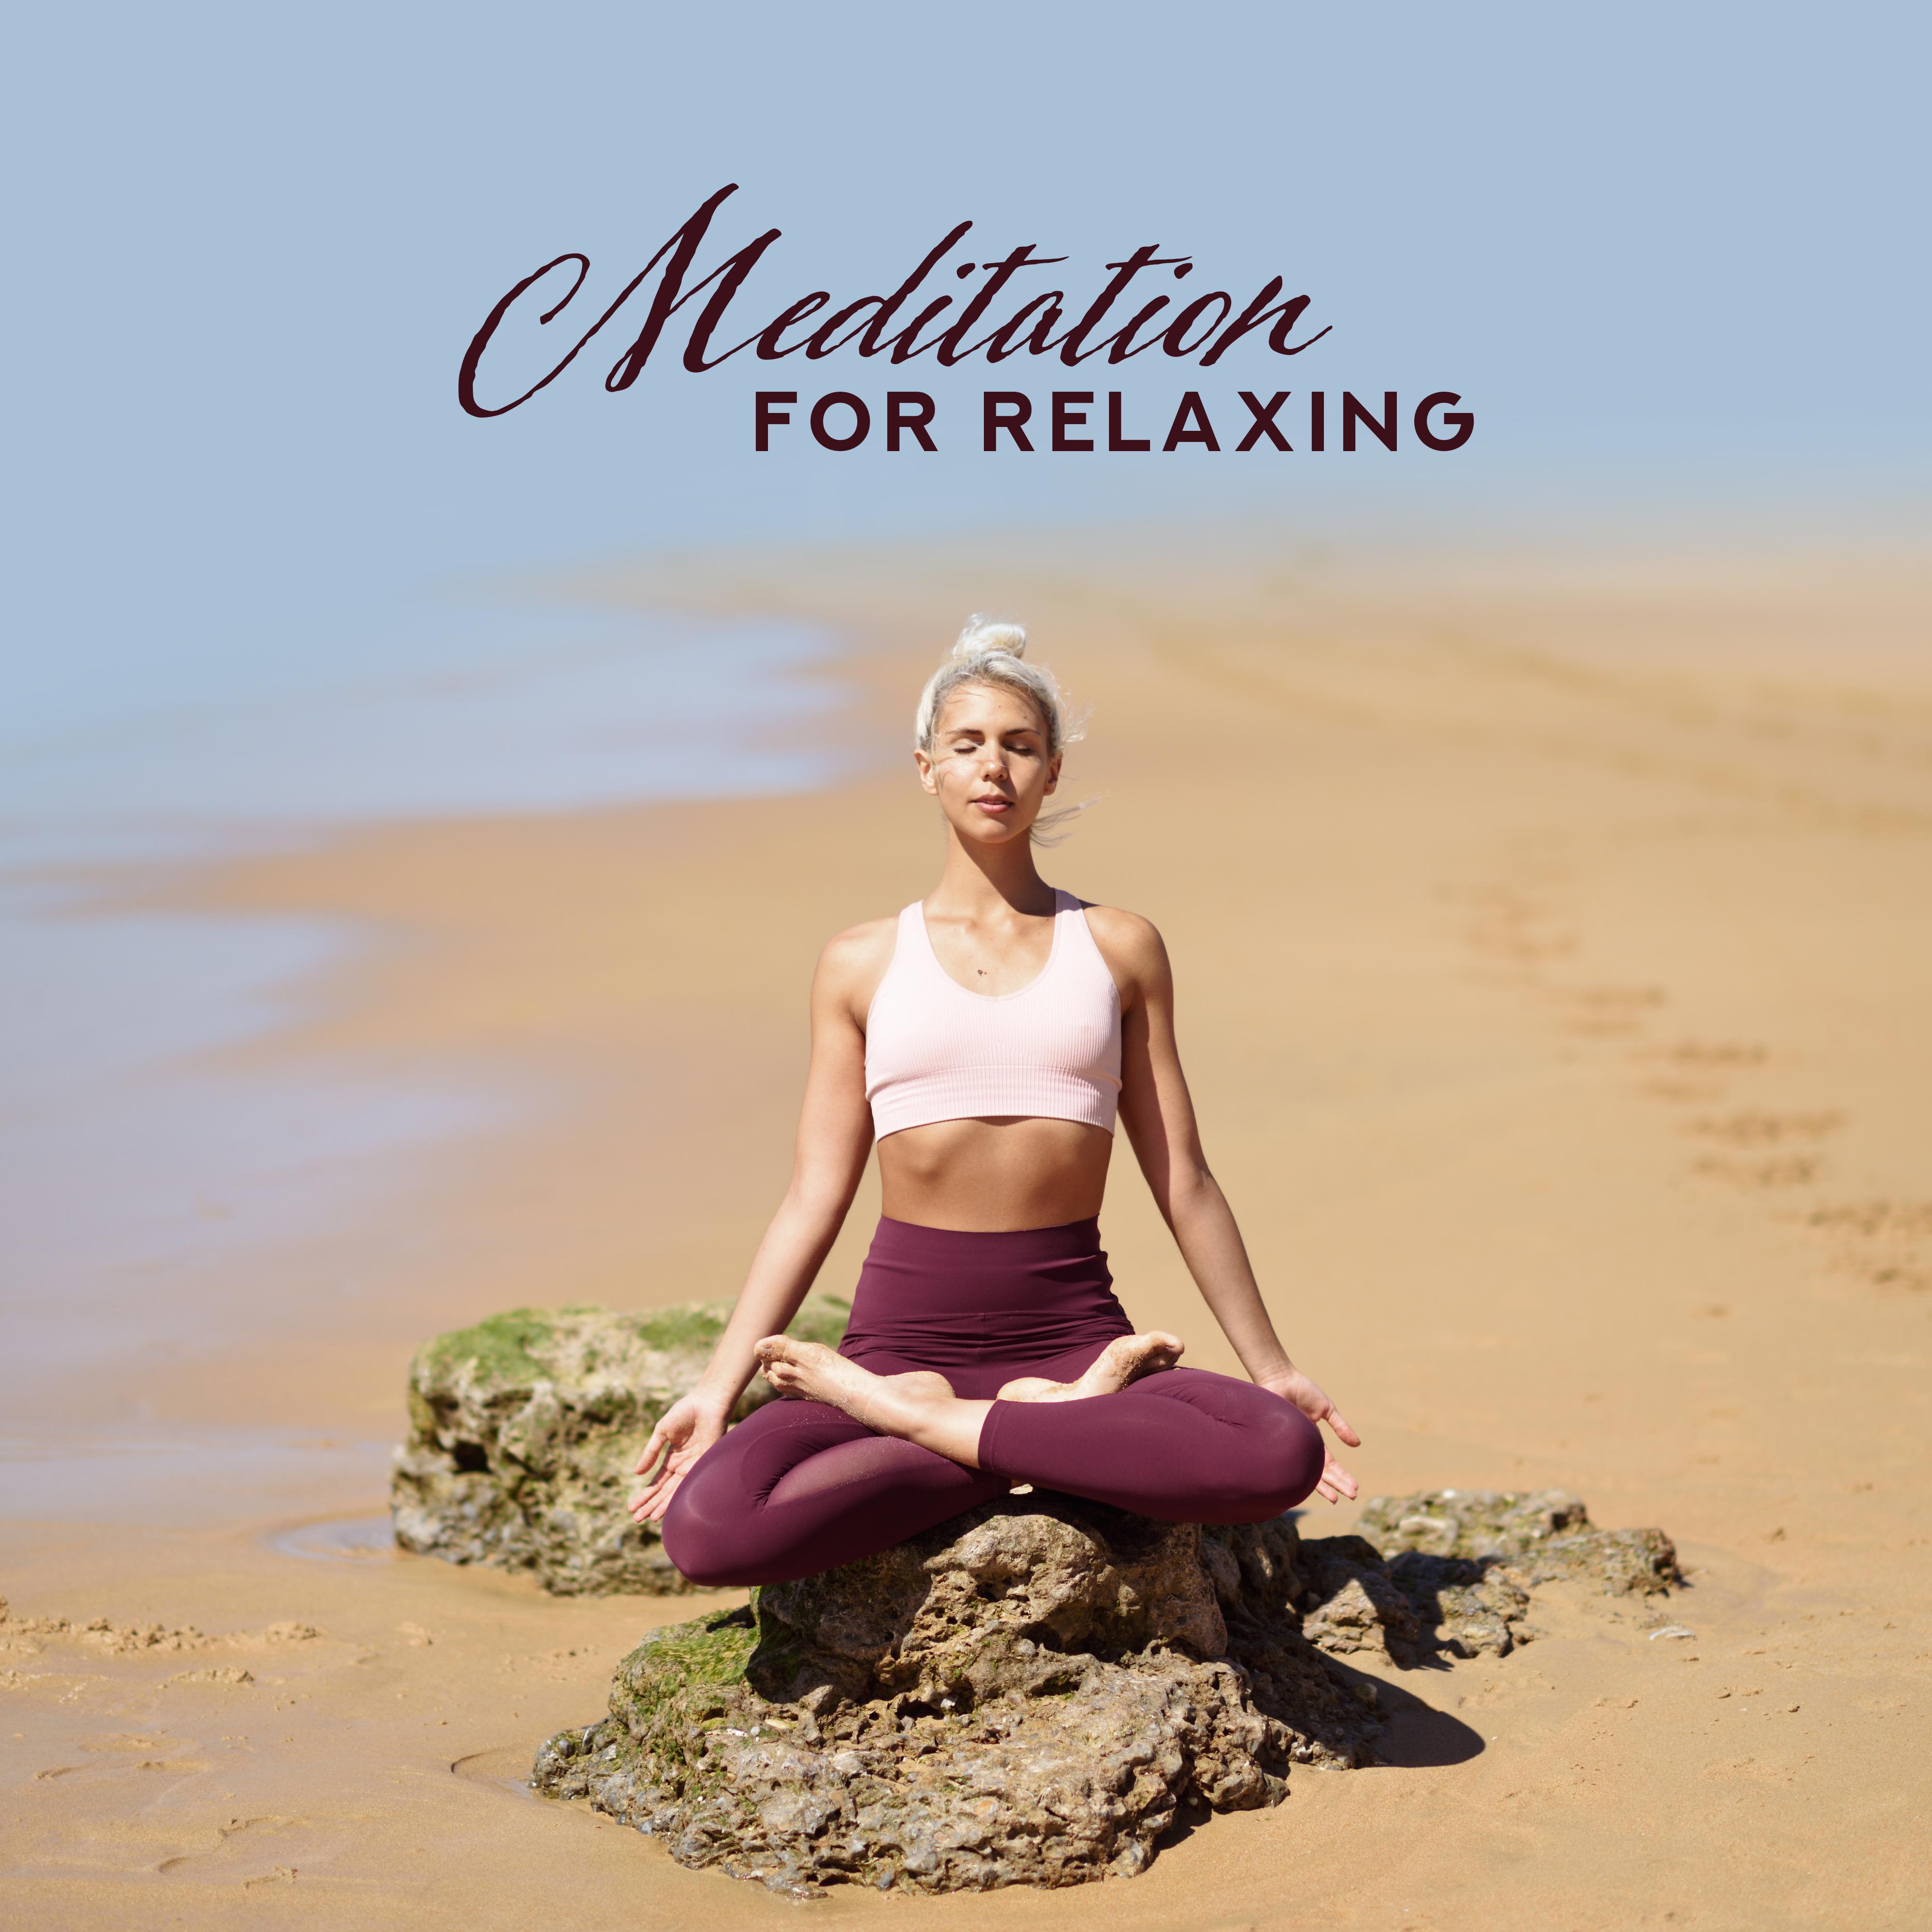 Meditation for Relaxing  Mindfulness Guide, Yoga Music to Relax, Yoga Pose Collection, Yoga Training, Deep Meditation, Zen, Reiki, Inner Balance